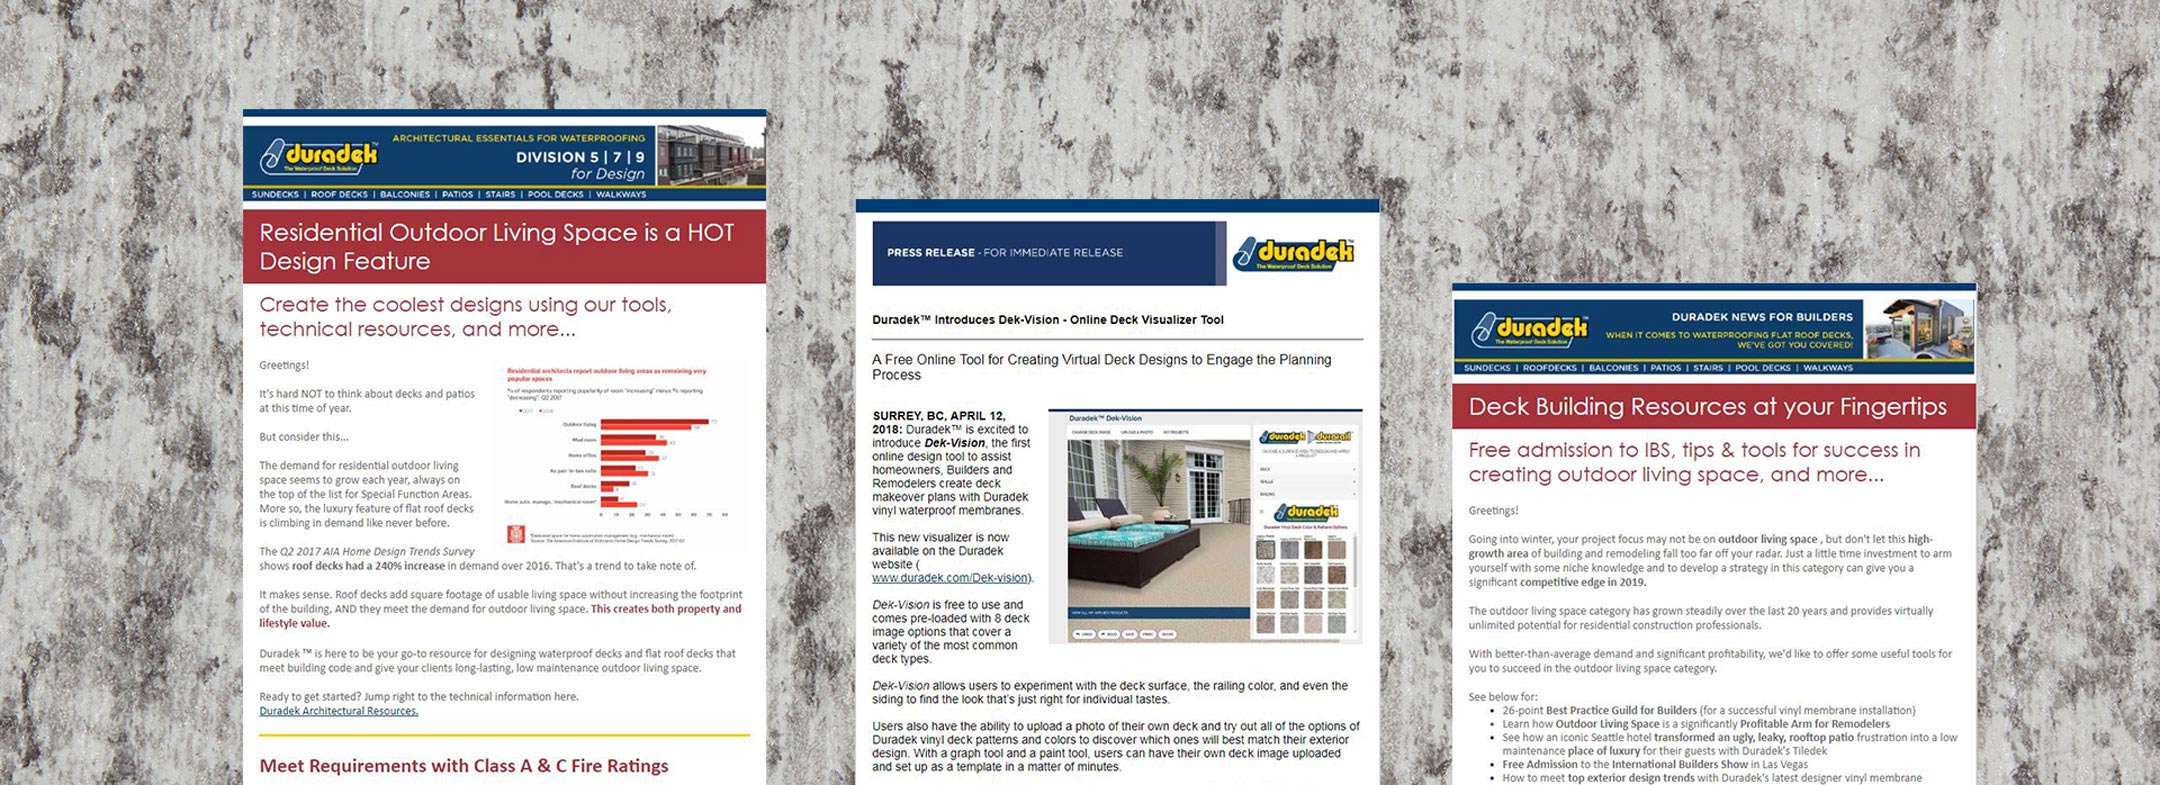 Duradek Newsletters - Sign up for Decking and Flat Roof Deck Related News